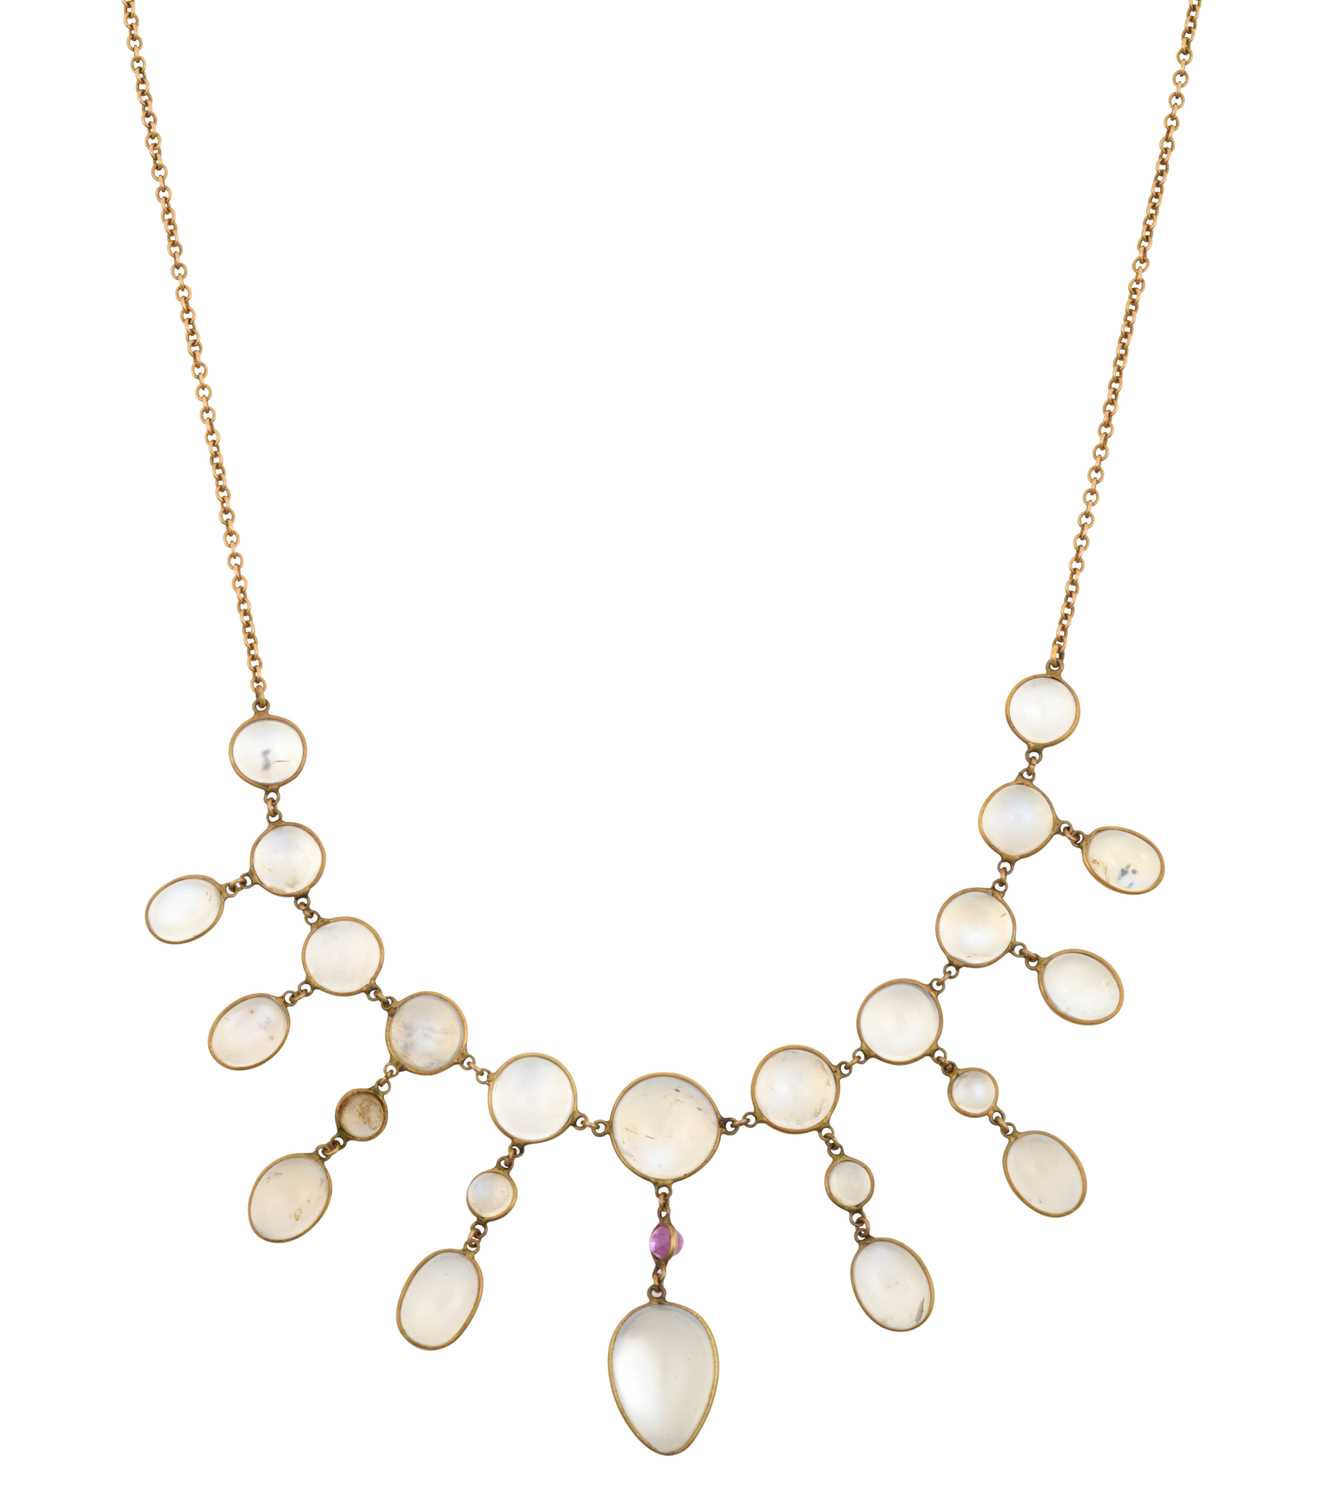 An Early 20th Century Moonstone and Synthetic Ruby Necklace eleven round cabochon moonstones suspend